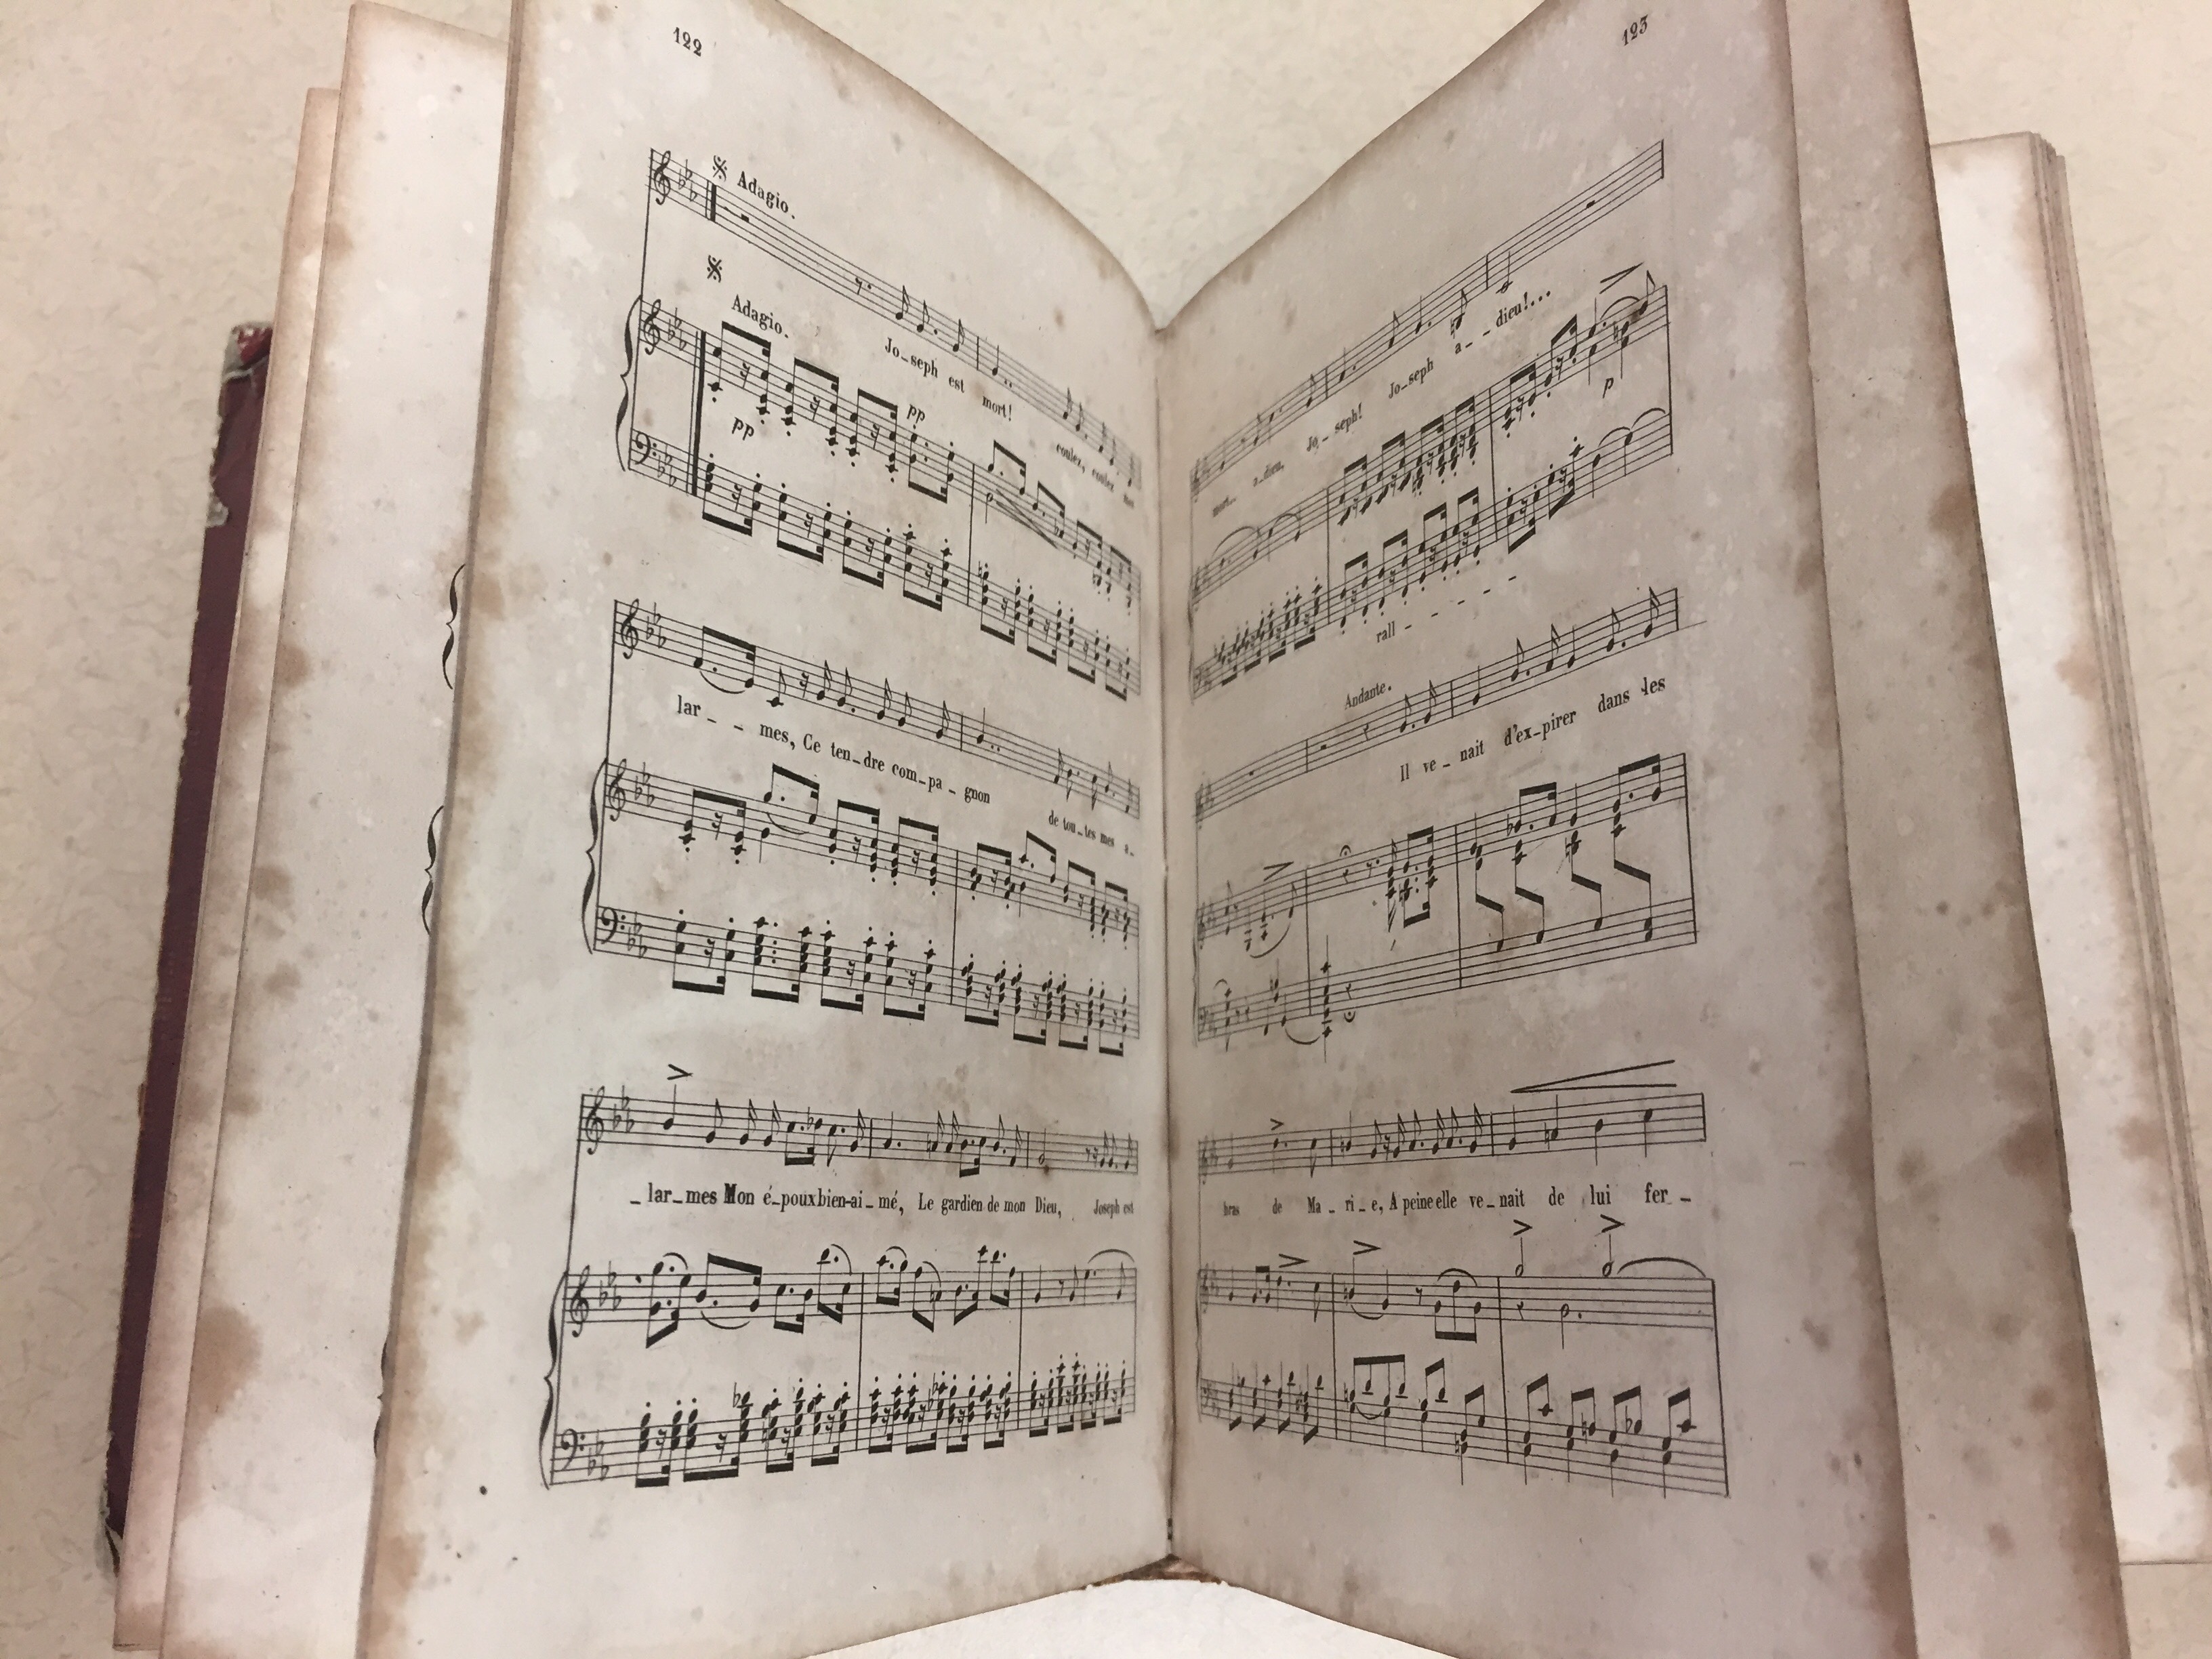 Hymnal open with pages fanning out